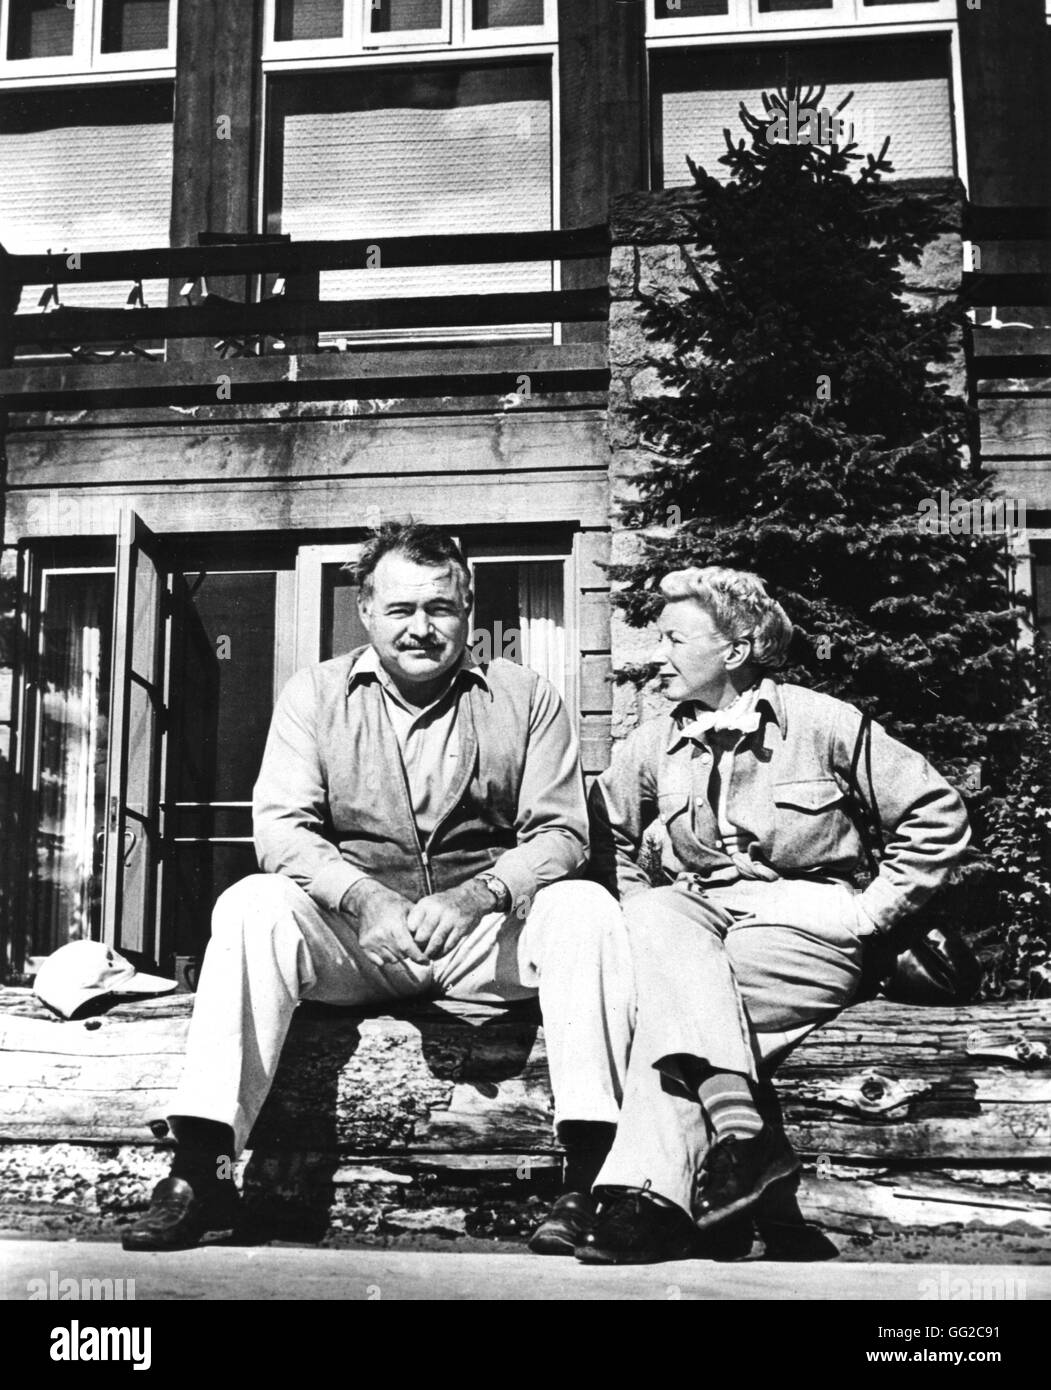 Ernest Hemingway (1899-1961) and his wife Mary Welch 20th century United States Stock Photo